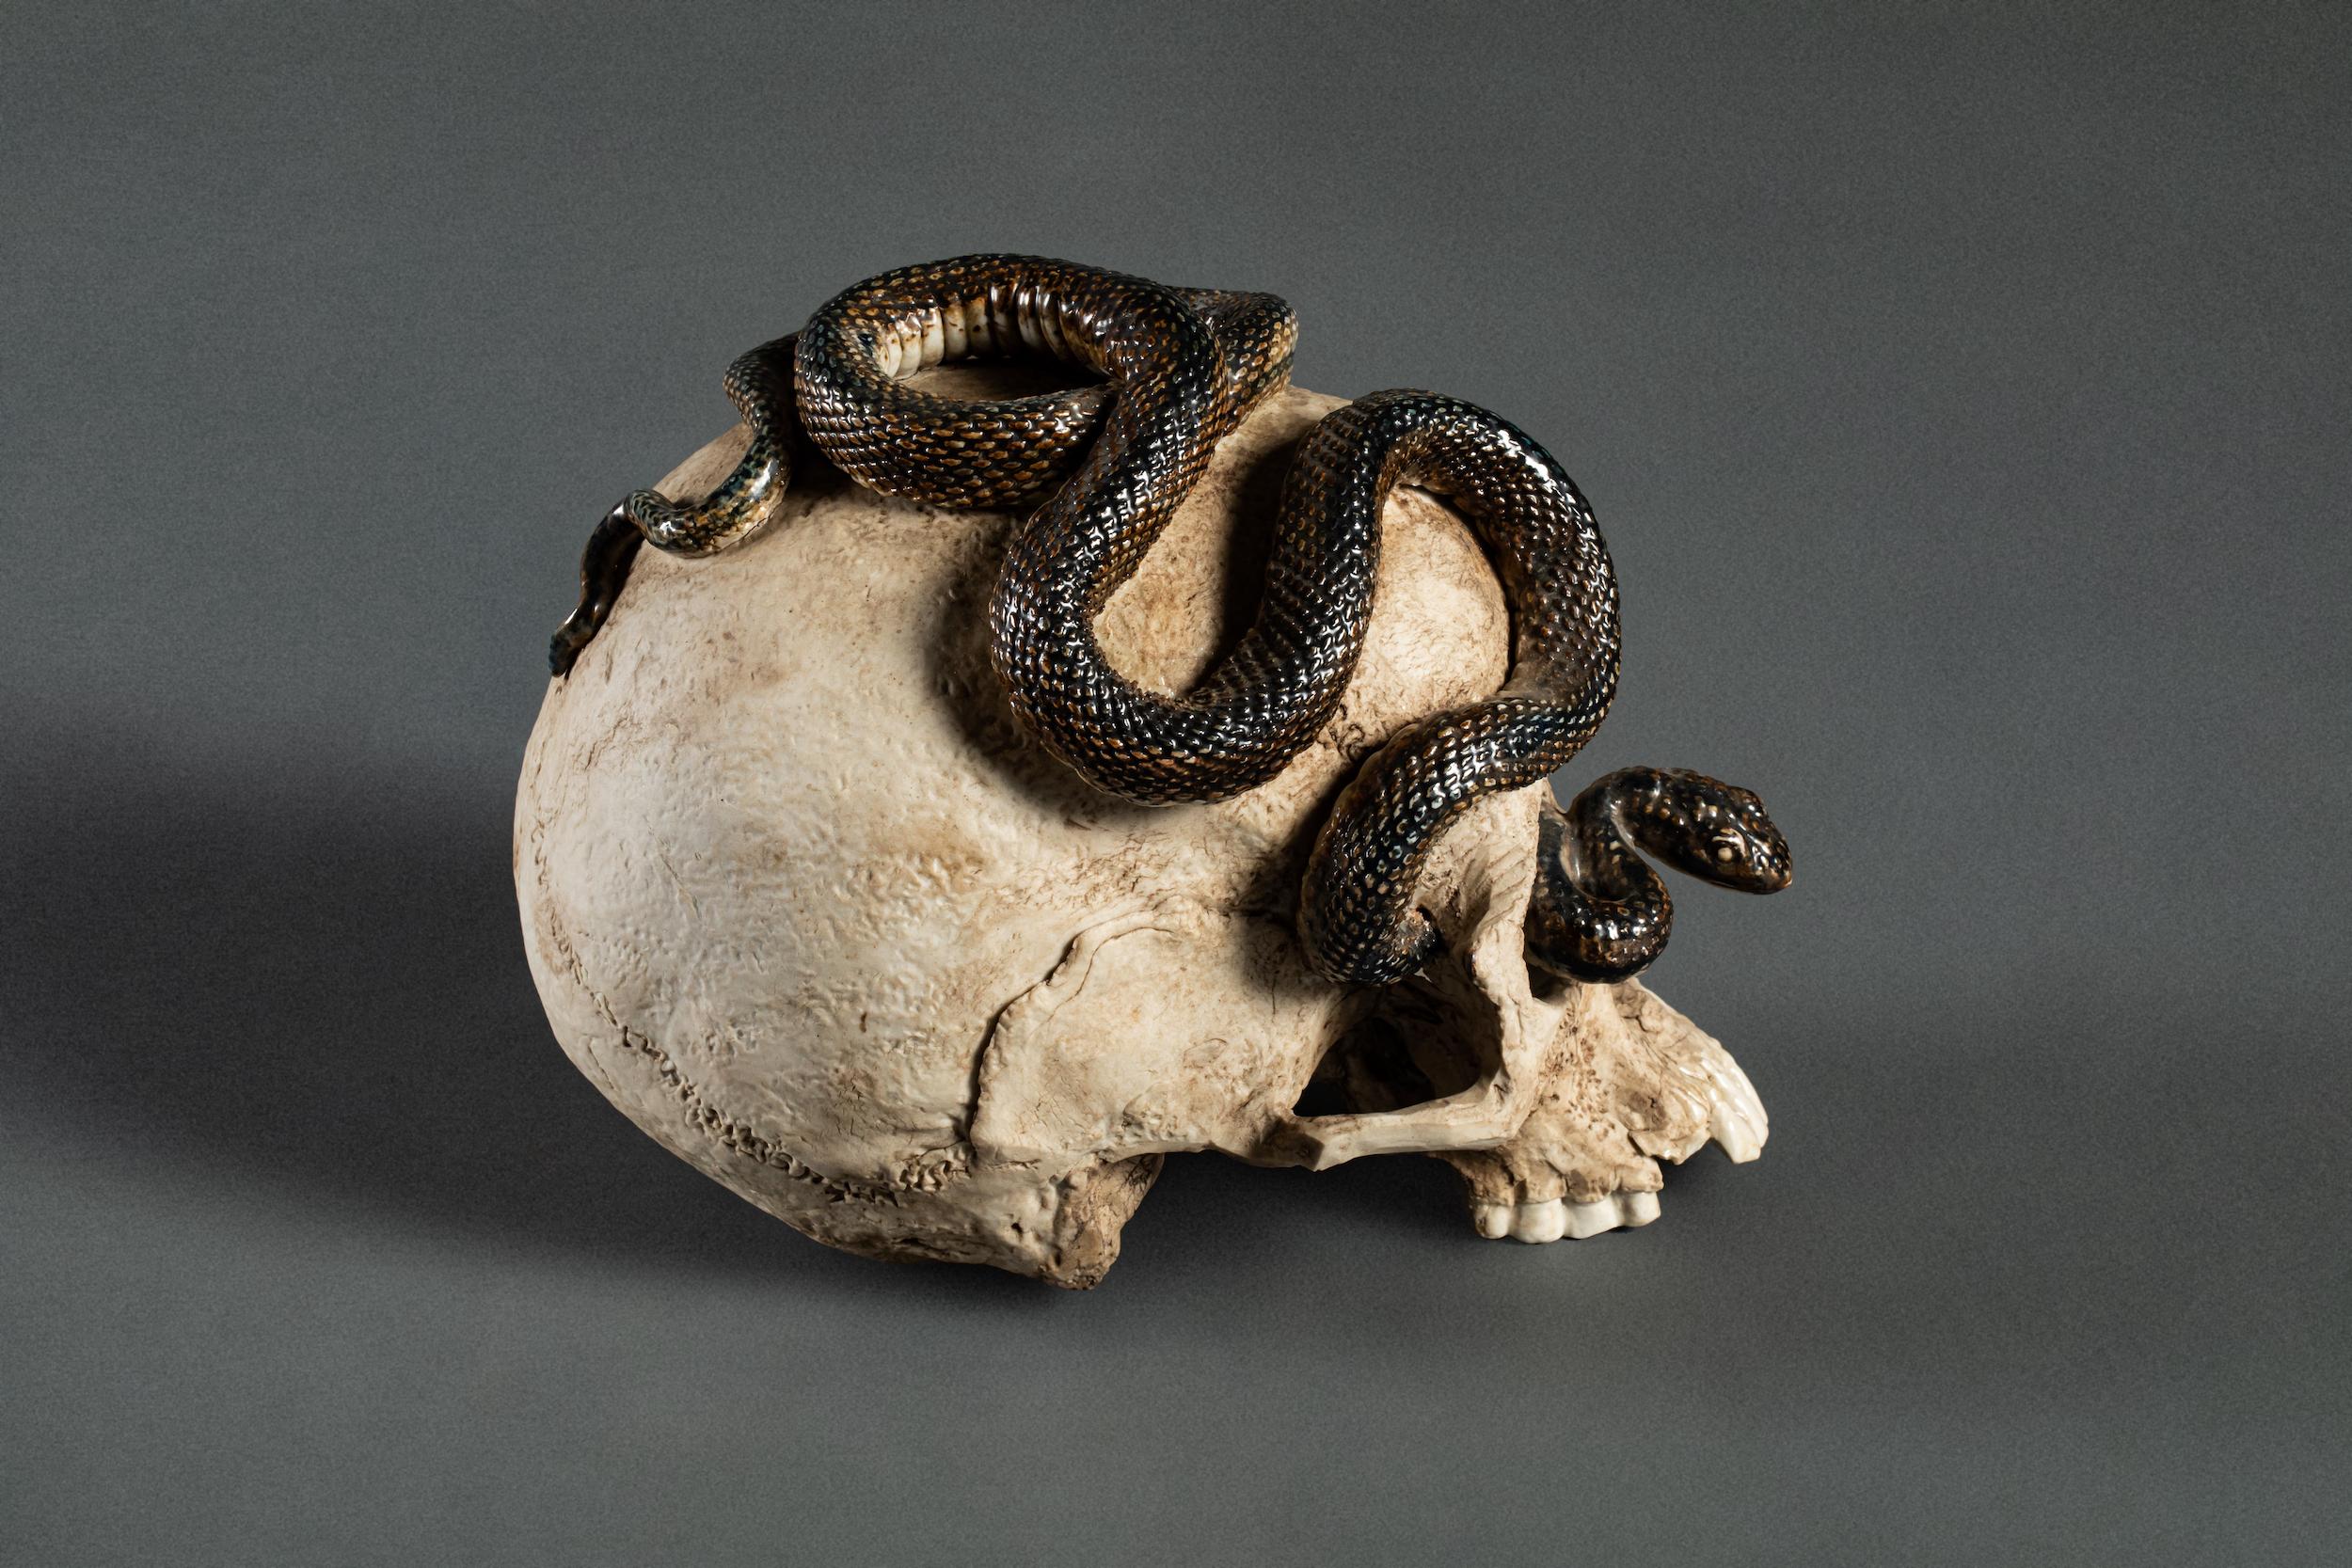 Japanese Ceramic Form of a Human Skull with a Snake For Sale 1